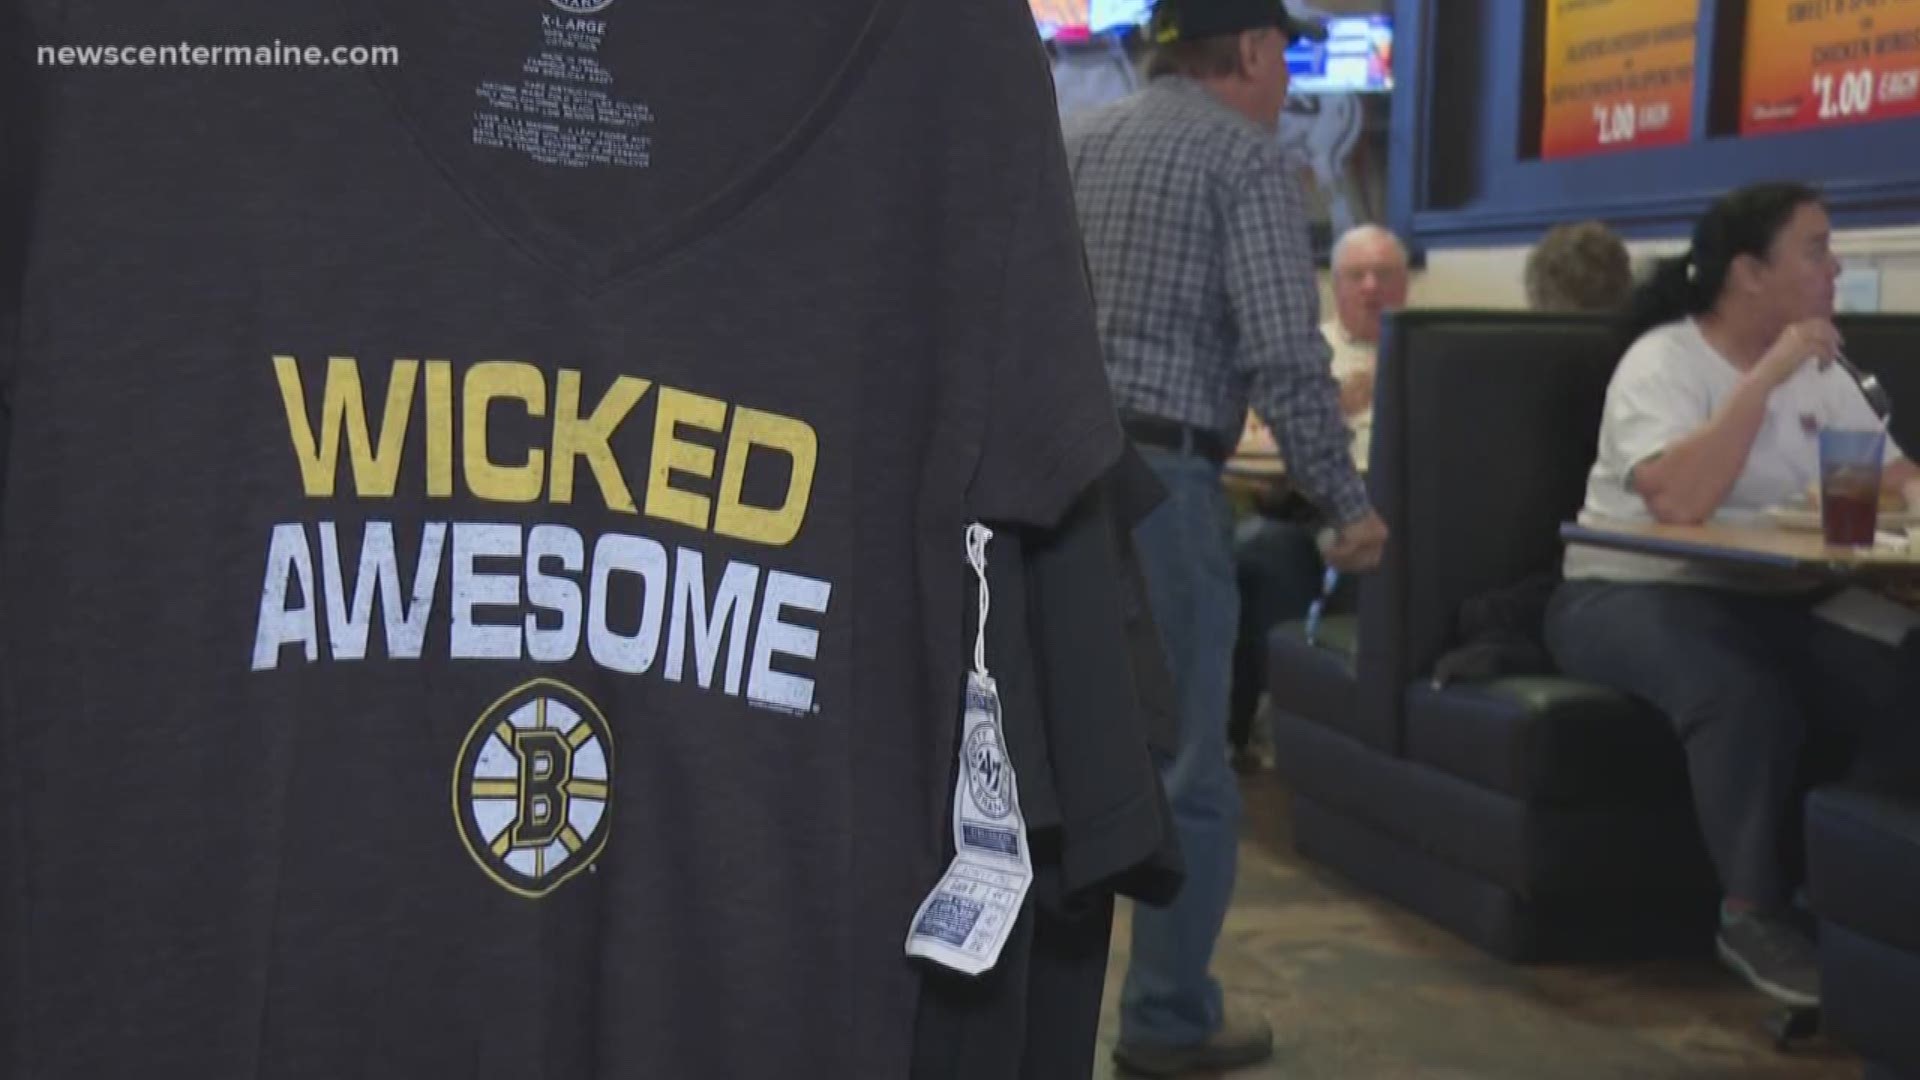 The Bruins playing in the Stanley Cup has brought on big business in Maine -- especially in local pubs and restaurants.